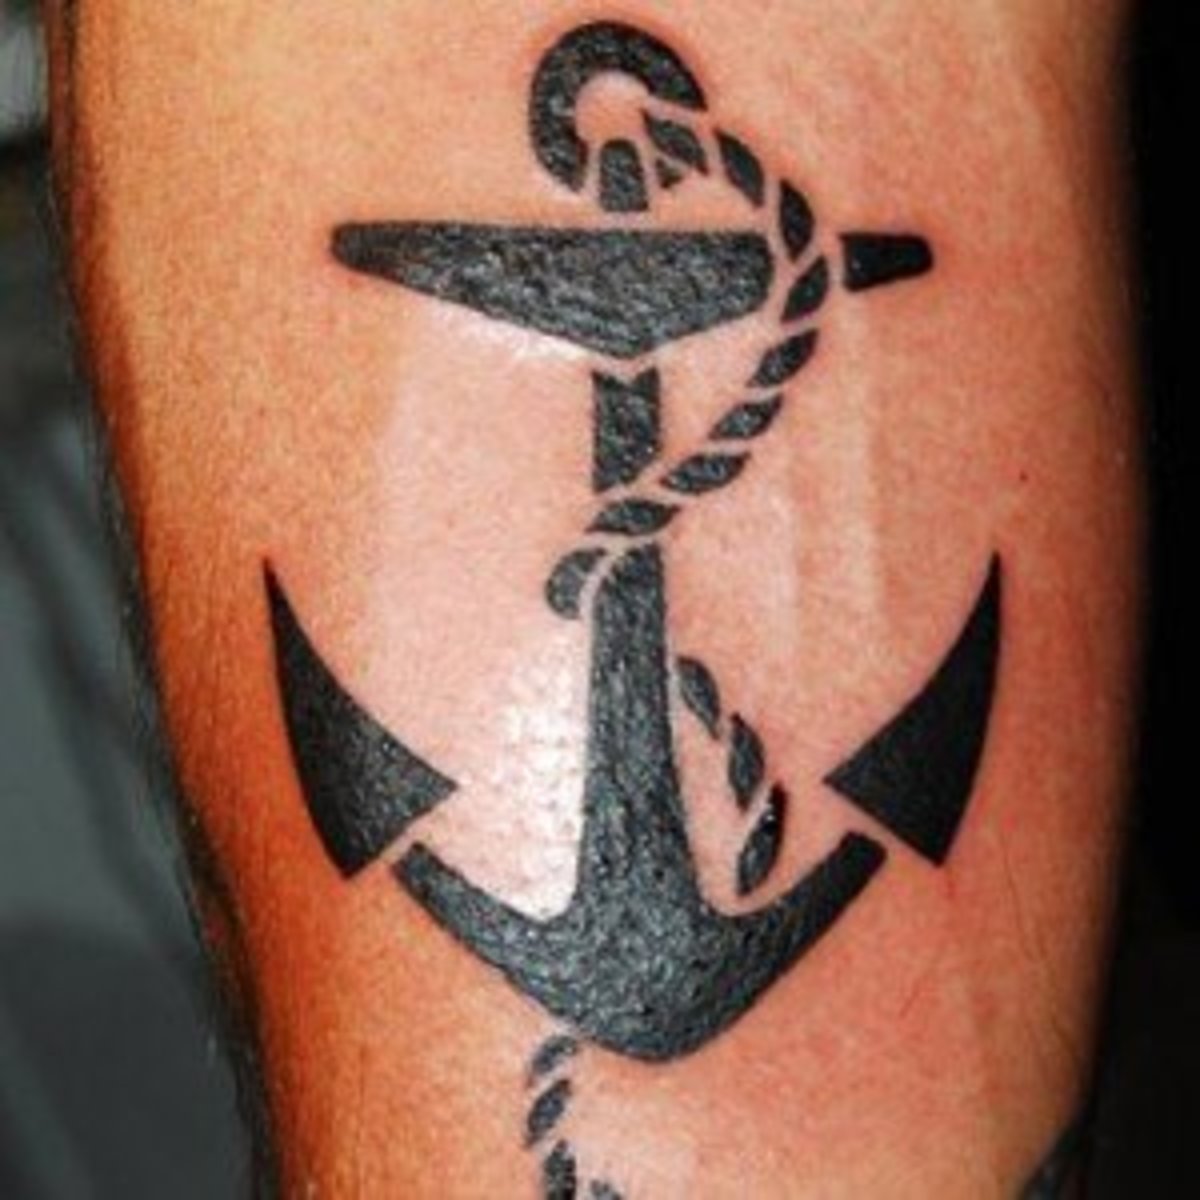 Anchor tattoos are some of the most common and classic designs out there. This monochromatic, stencil-style anchor tat presents a well-known icon in a fresh way. 